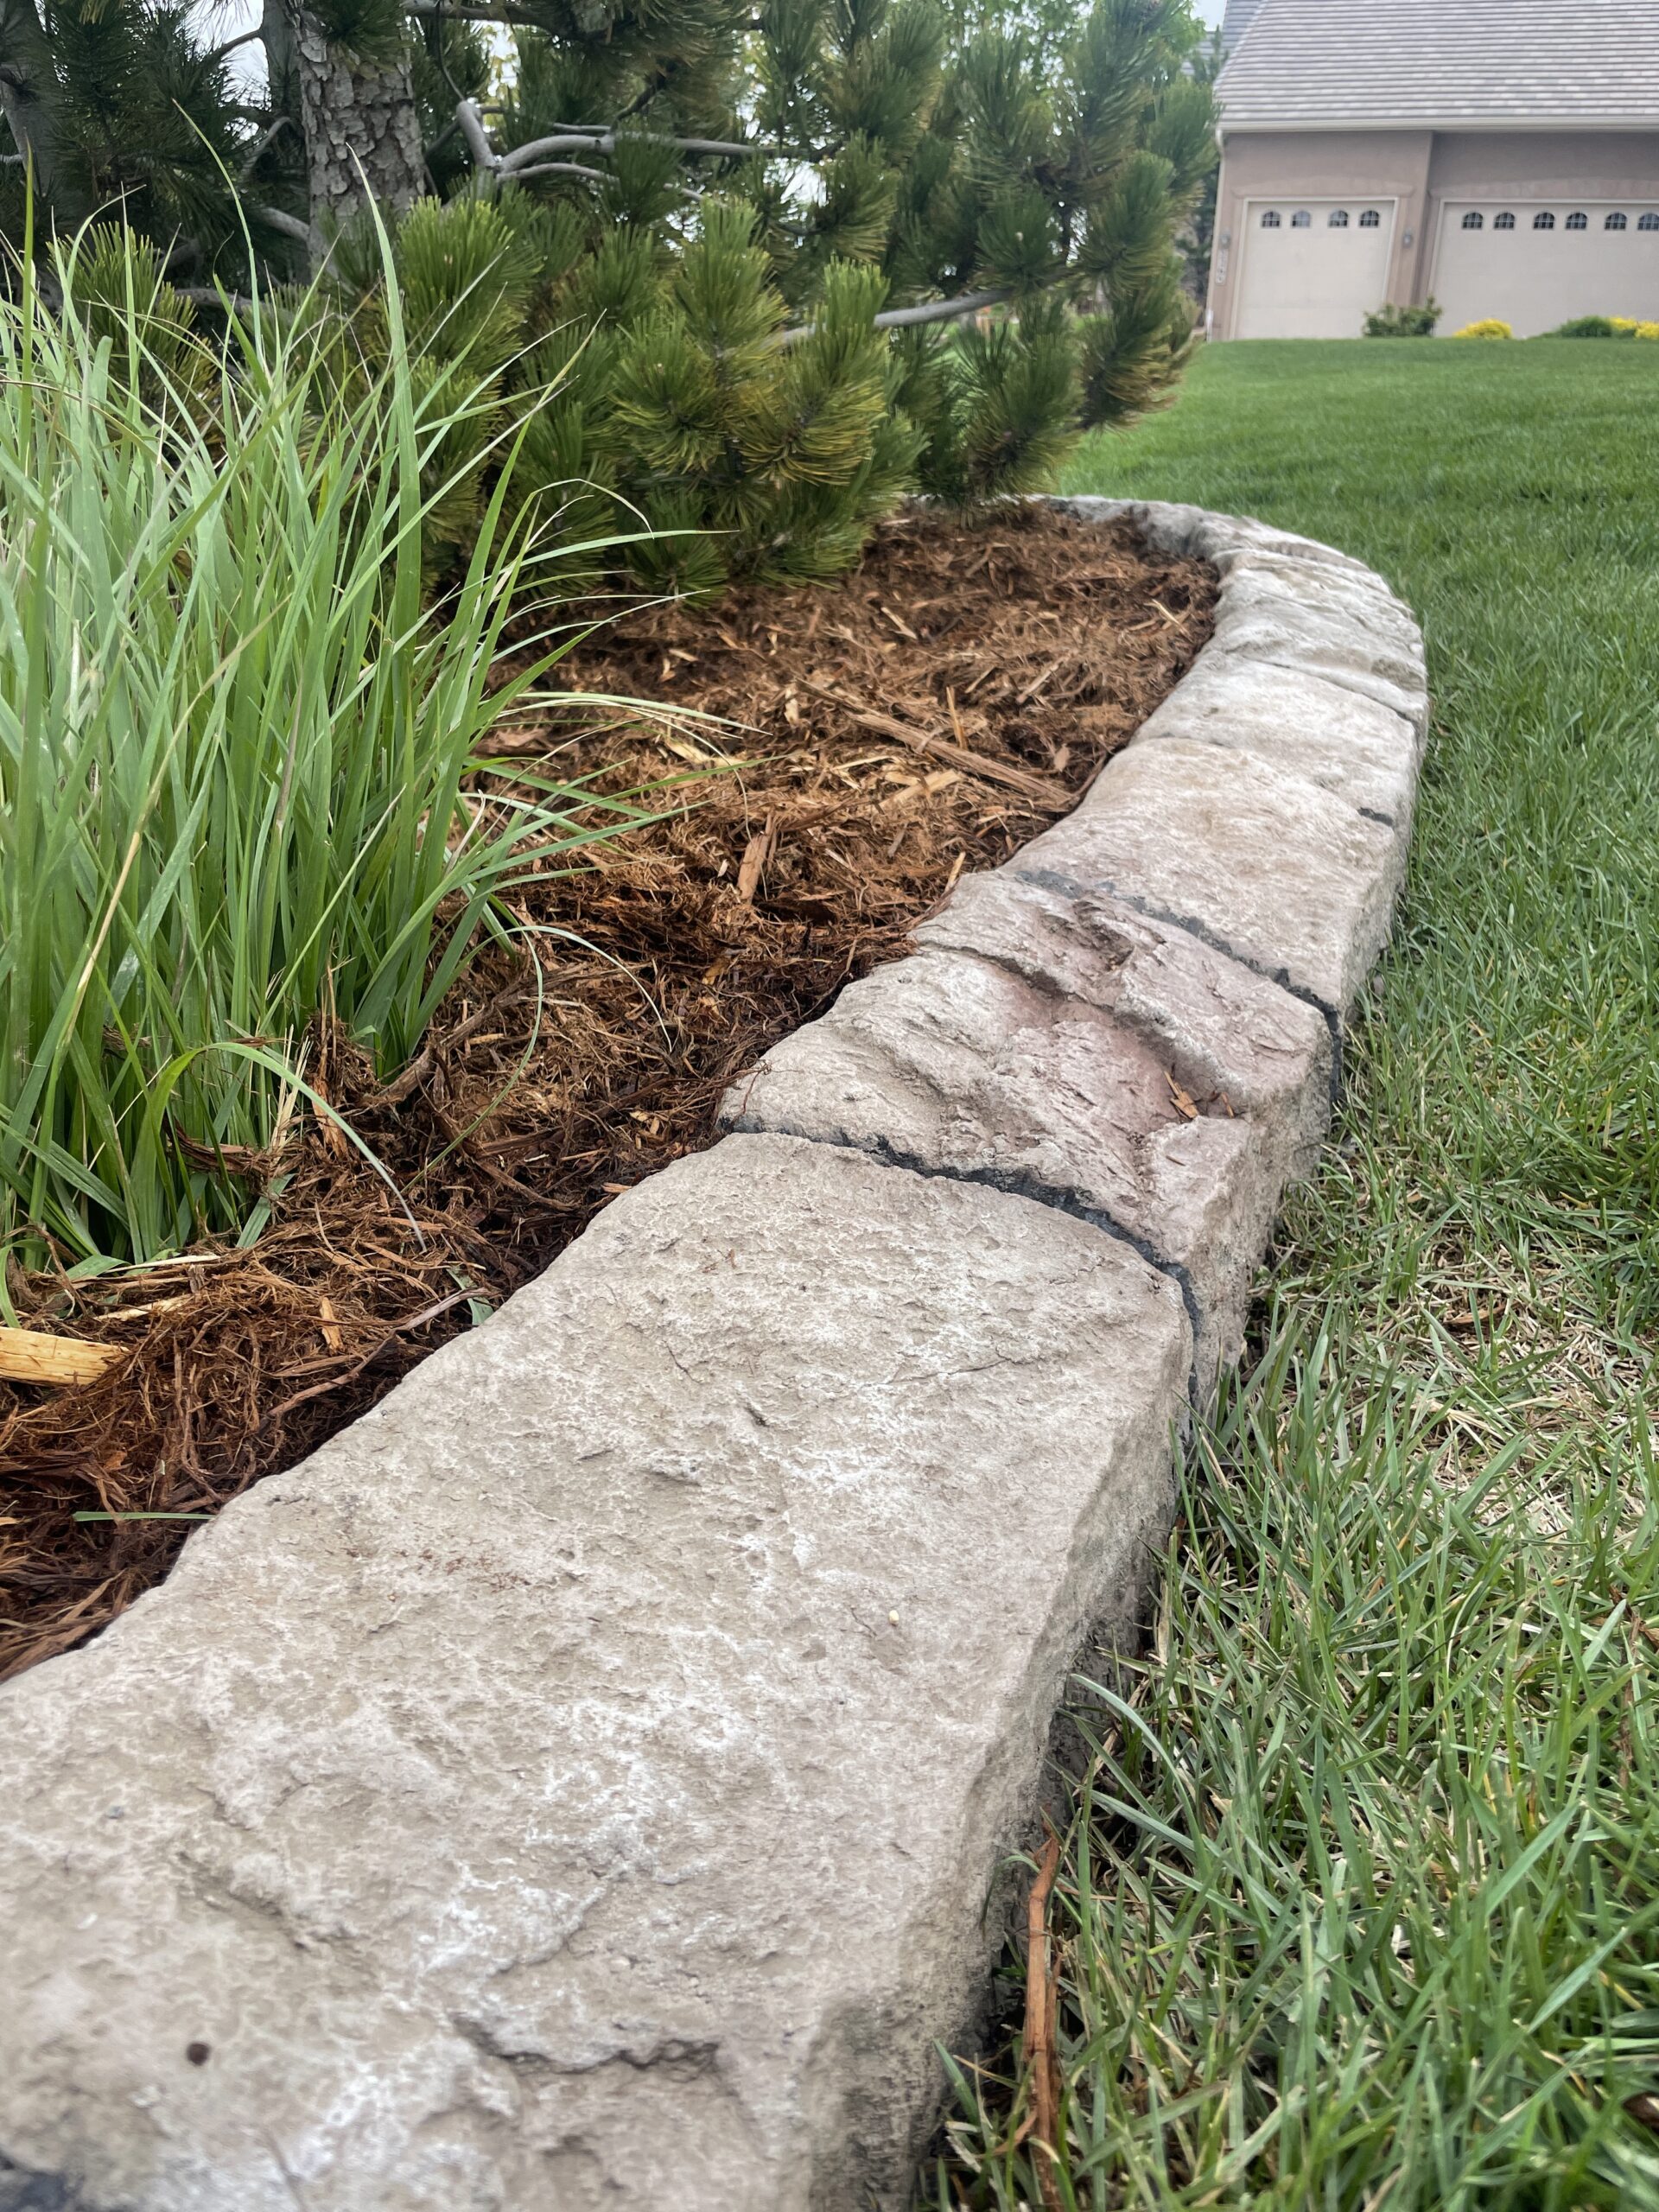 Concrete lawn edging case study for townhouse complex in Colorado Springs, CO